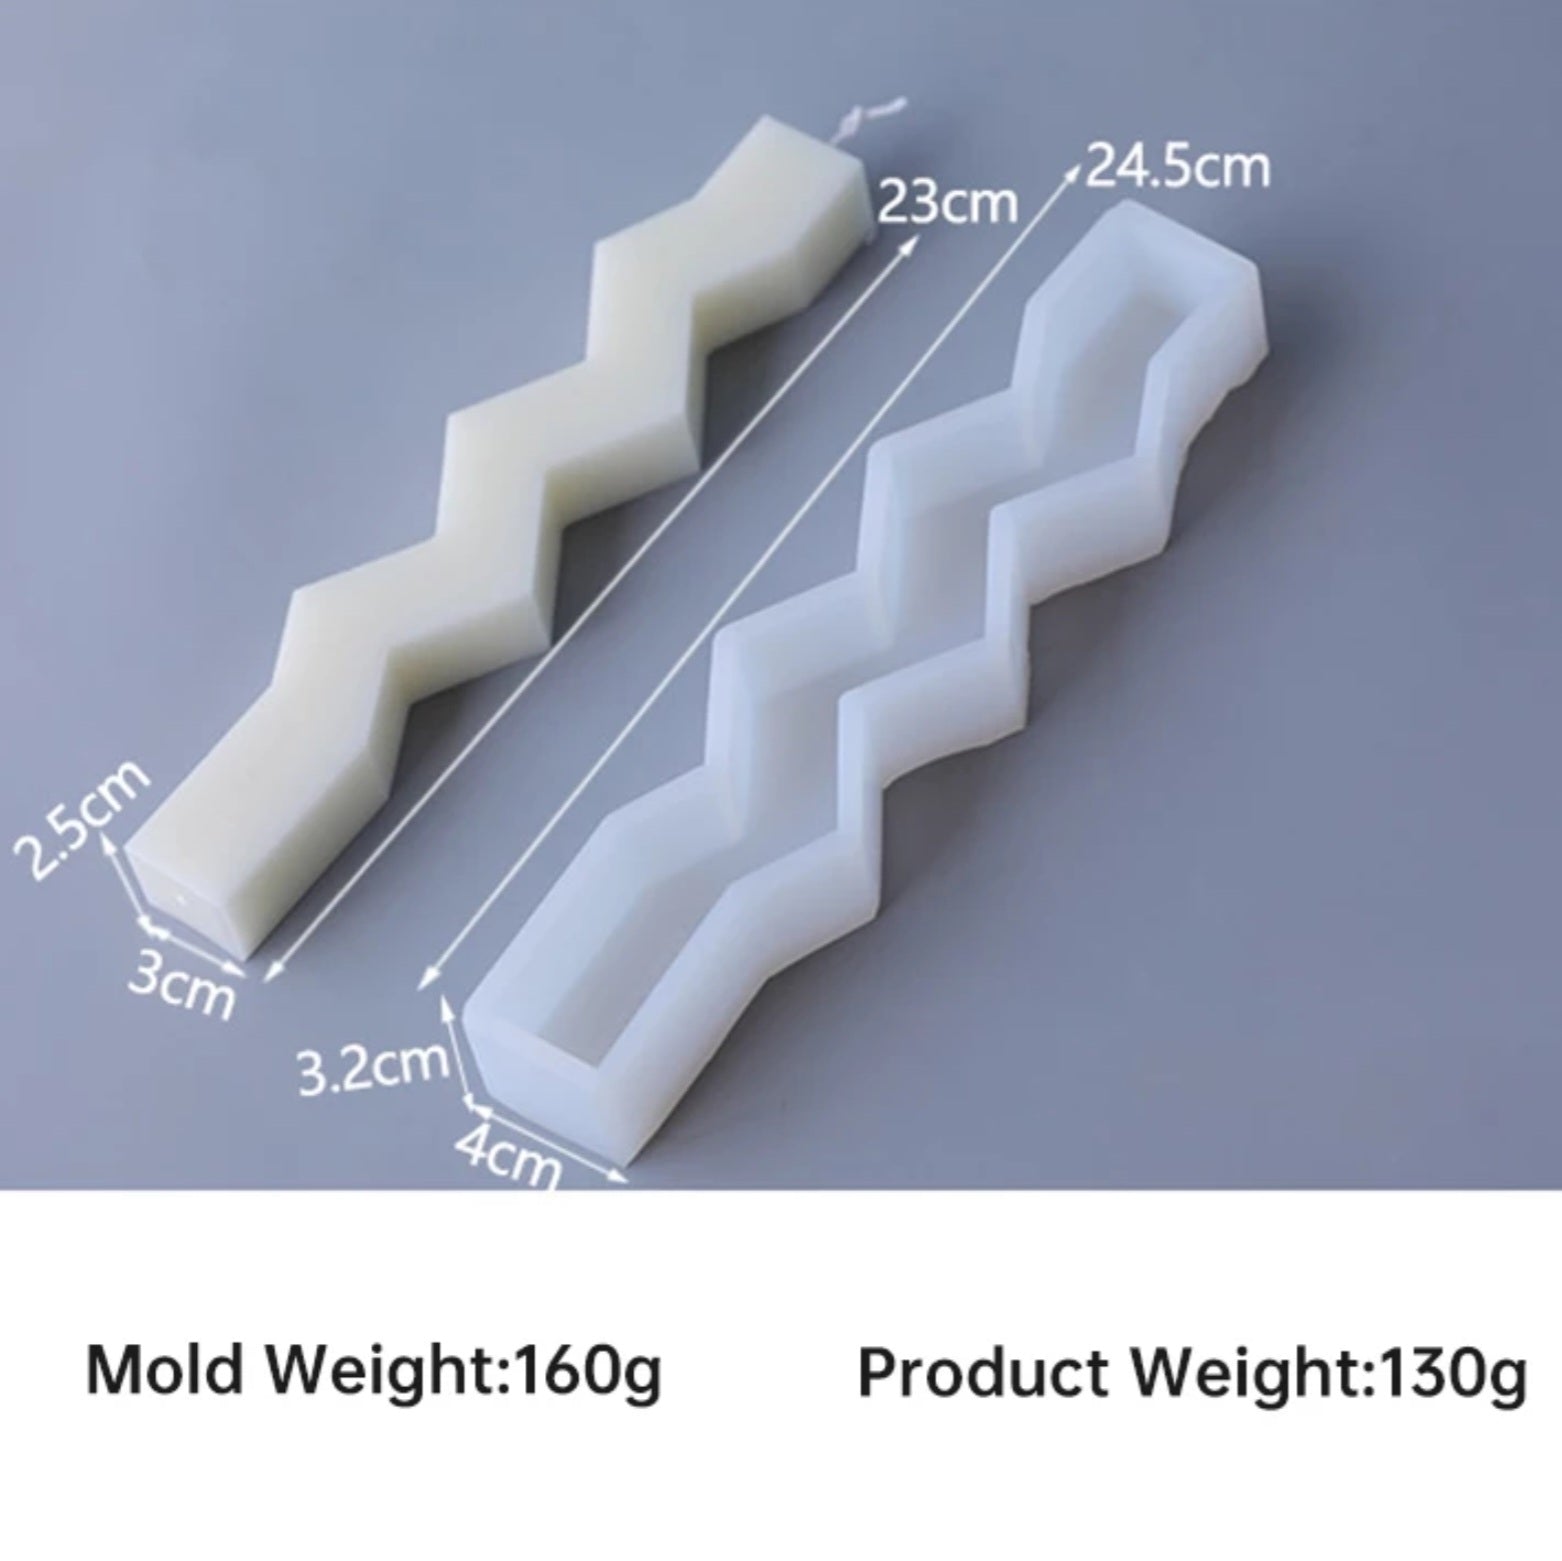 Zigzag & Wavy Candle Mould 3 - Silicone Mould, Mold for DIY Candles. Created using candle making kit with cotton candle wicks and candle colour chips. Using soy wax for pillar candles. Sold by Myka Candles Moulds Australia